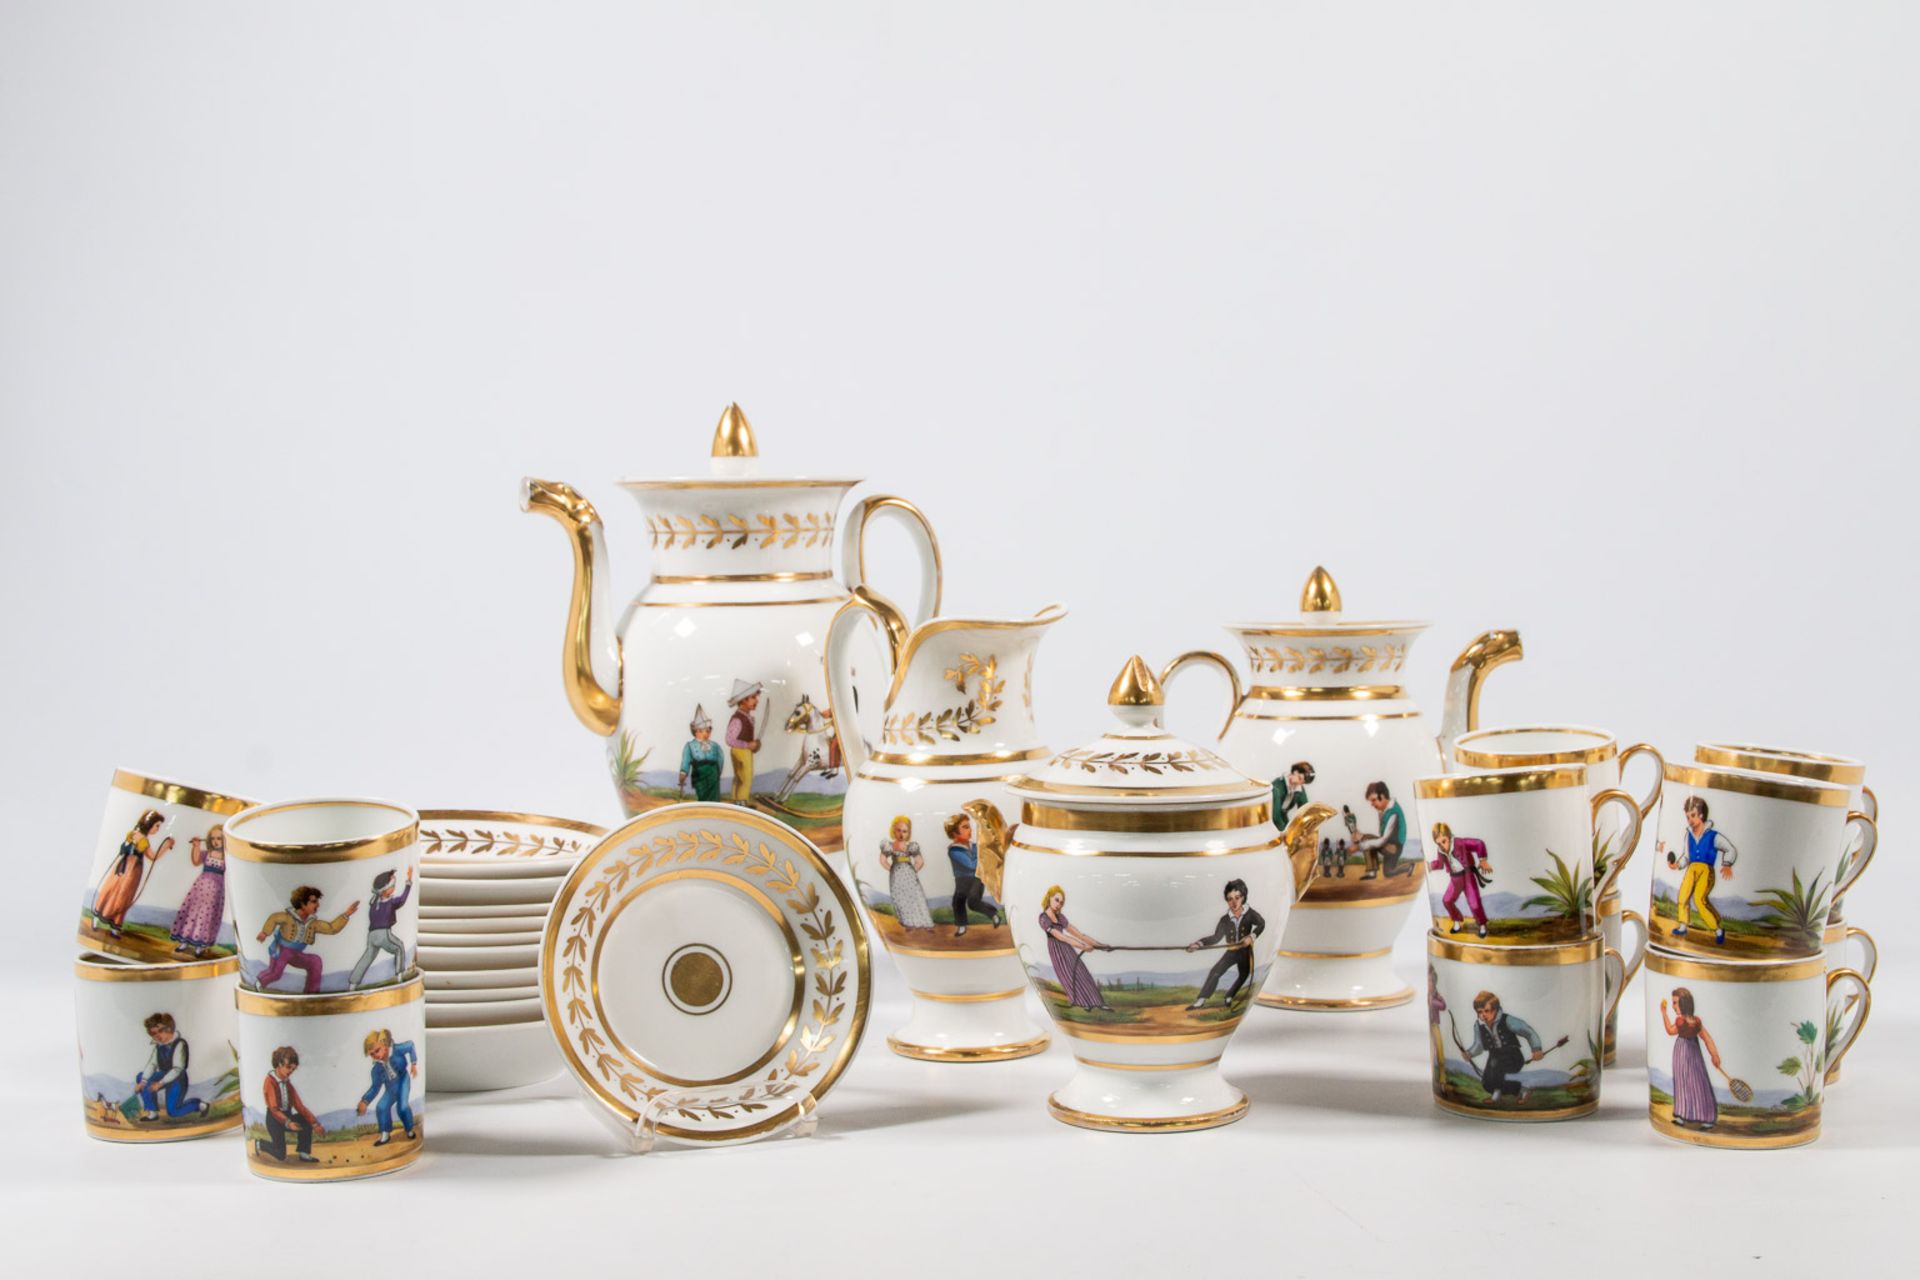 A Complete 'Vieux Bruxelles' coffee and tea service made of porcelain. - Image 41 of 53